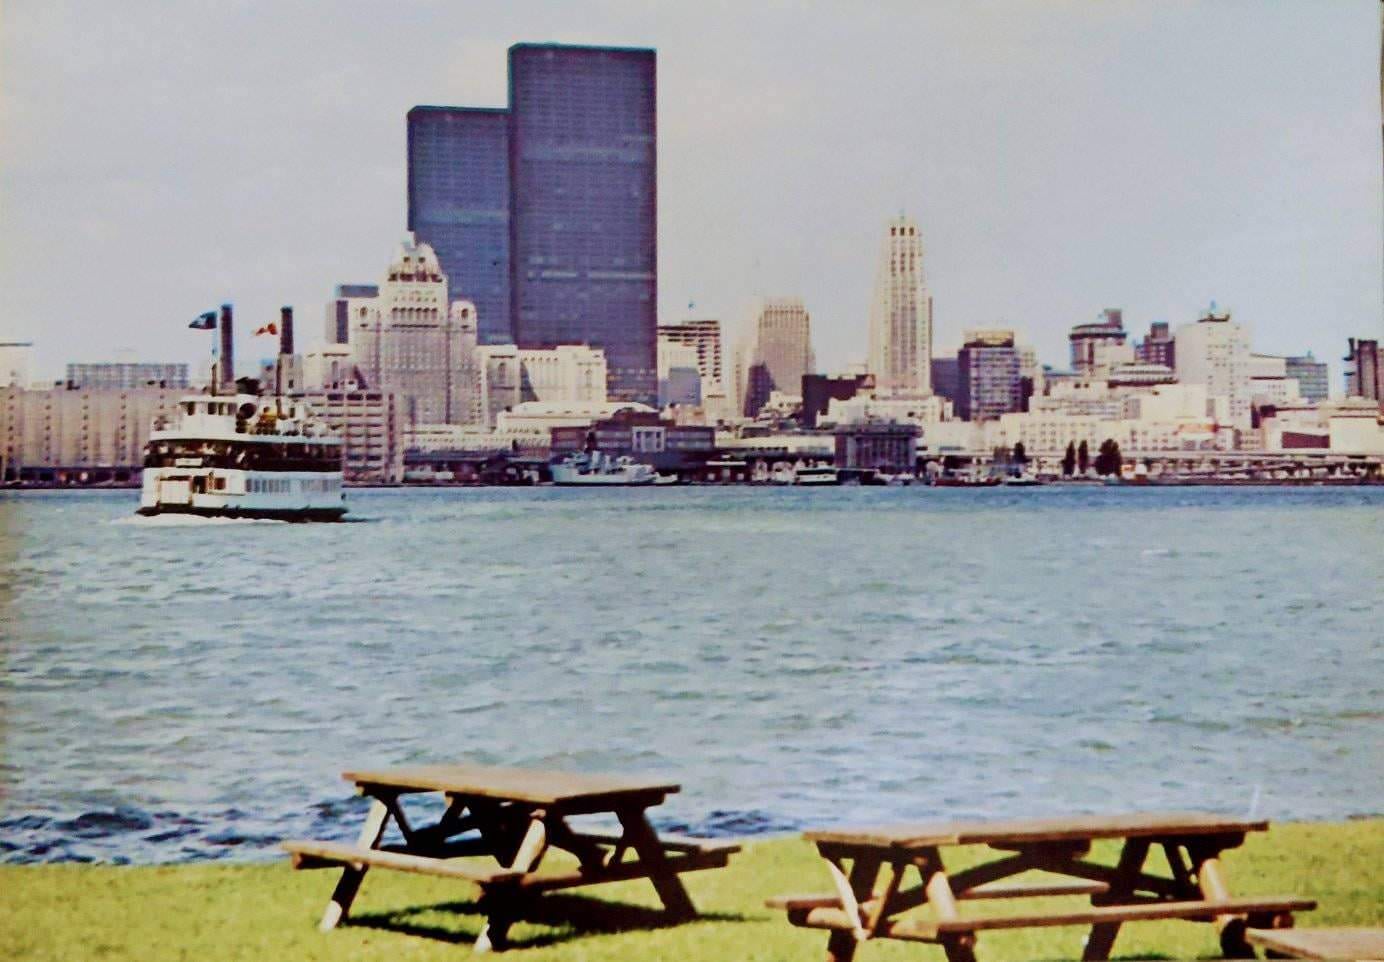 Skyline of downtown Toronto from the Toronto Islands, 1970s